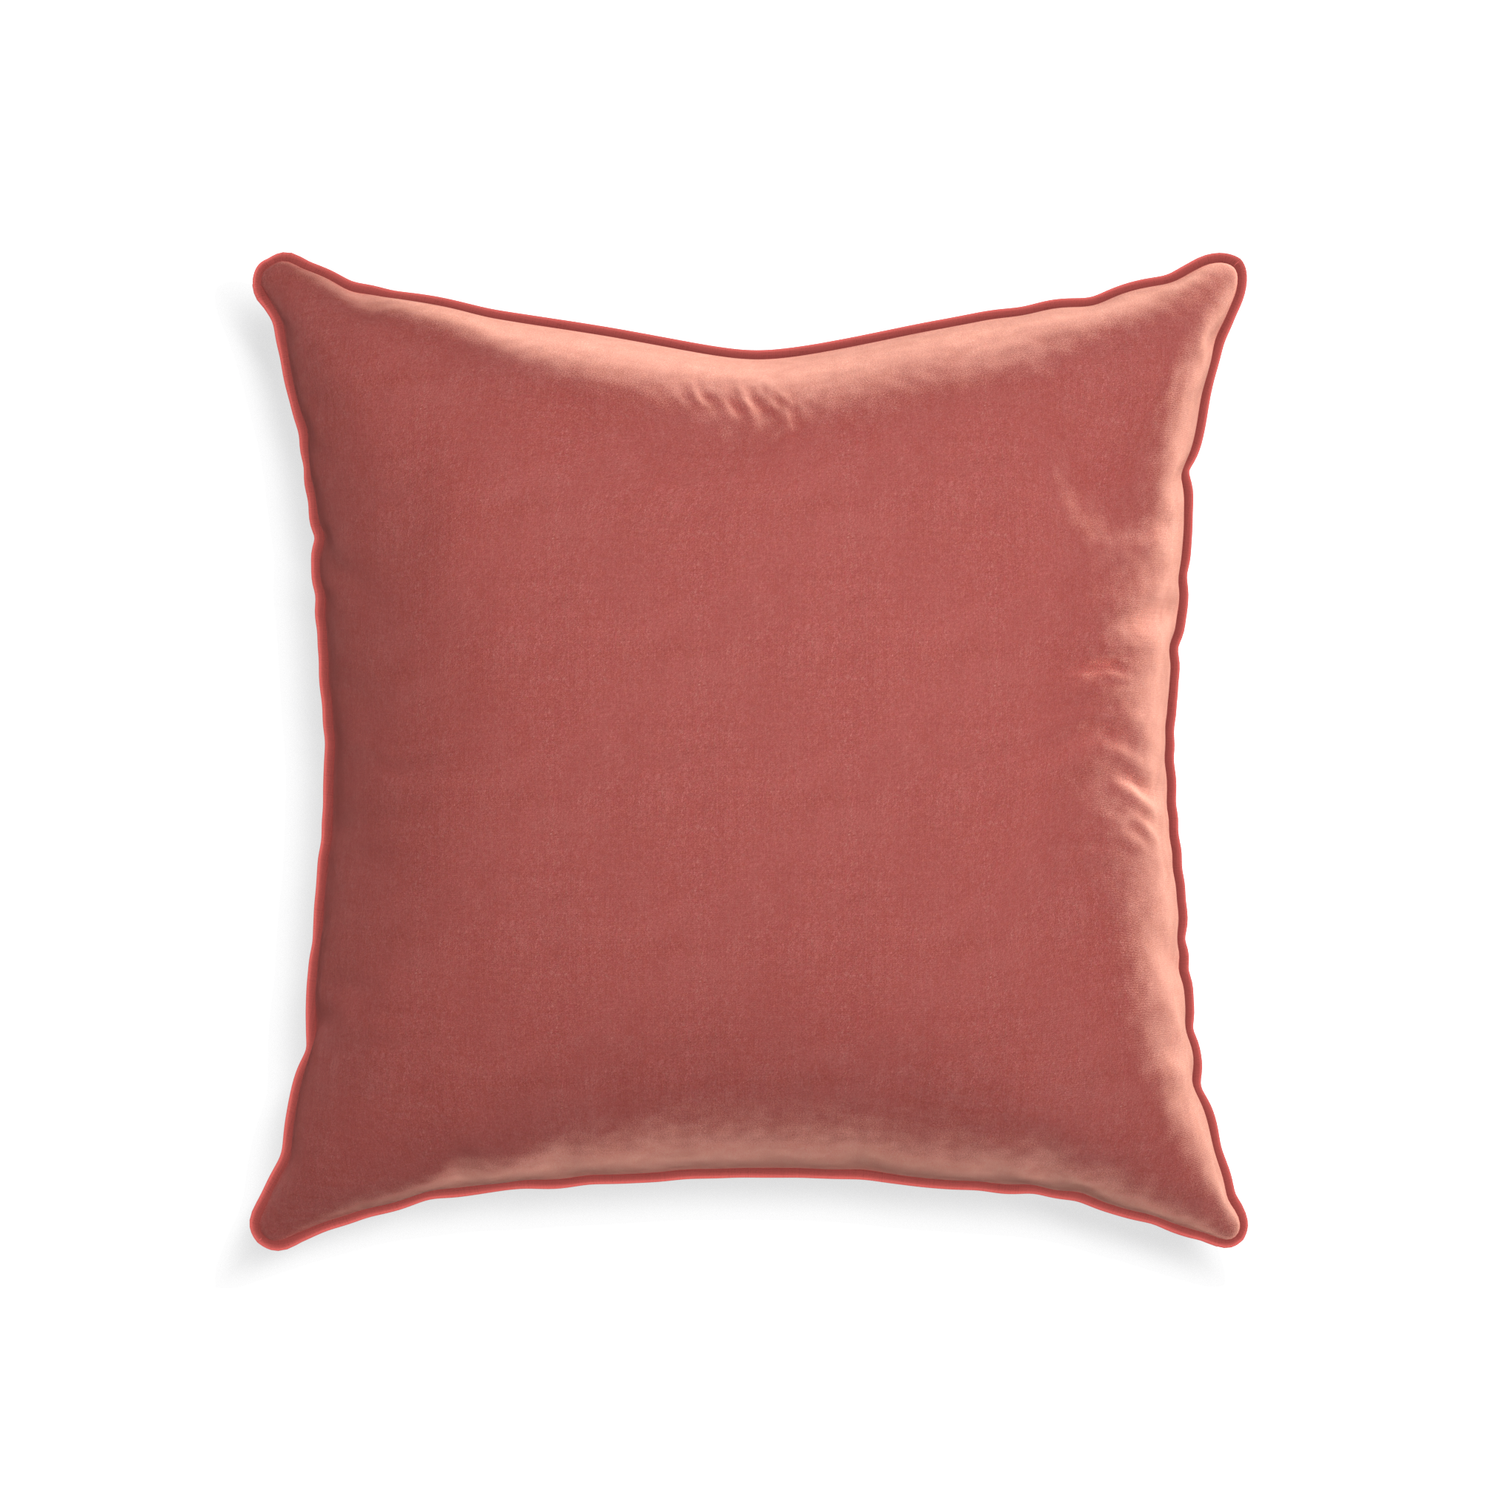 22-square cosmo velvet custom coralpillow with c piping on white background